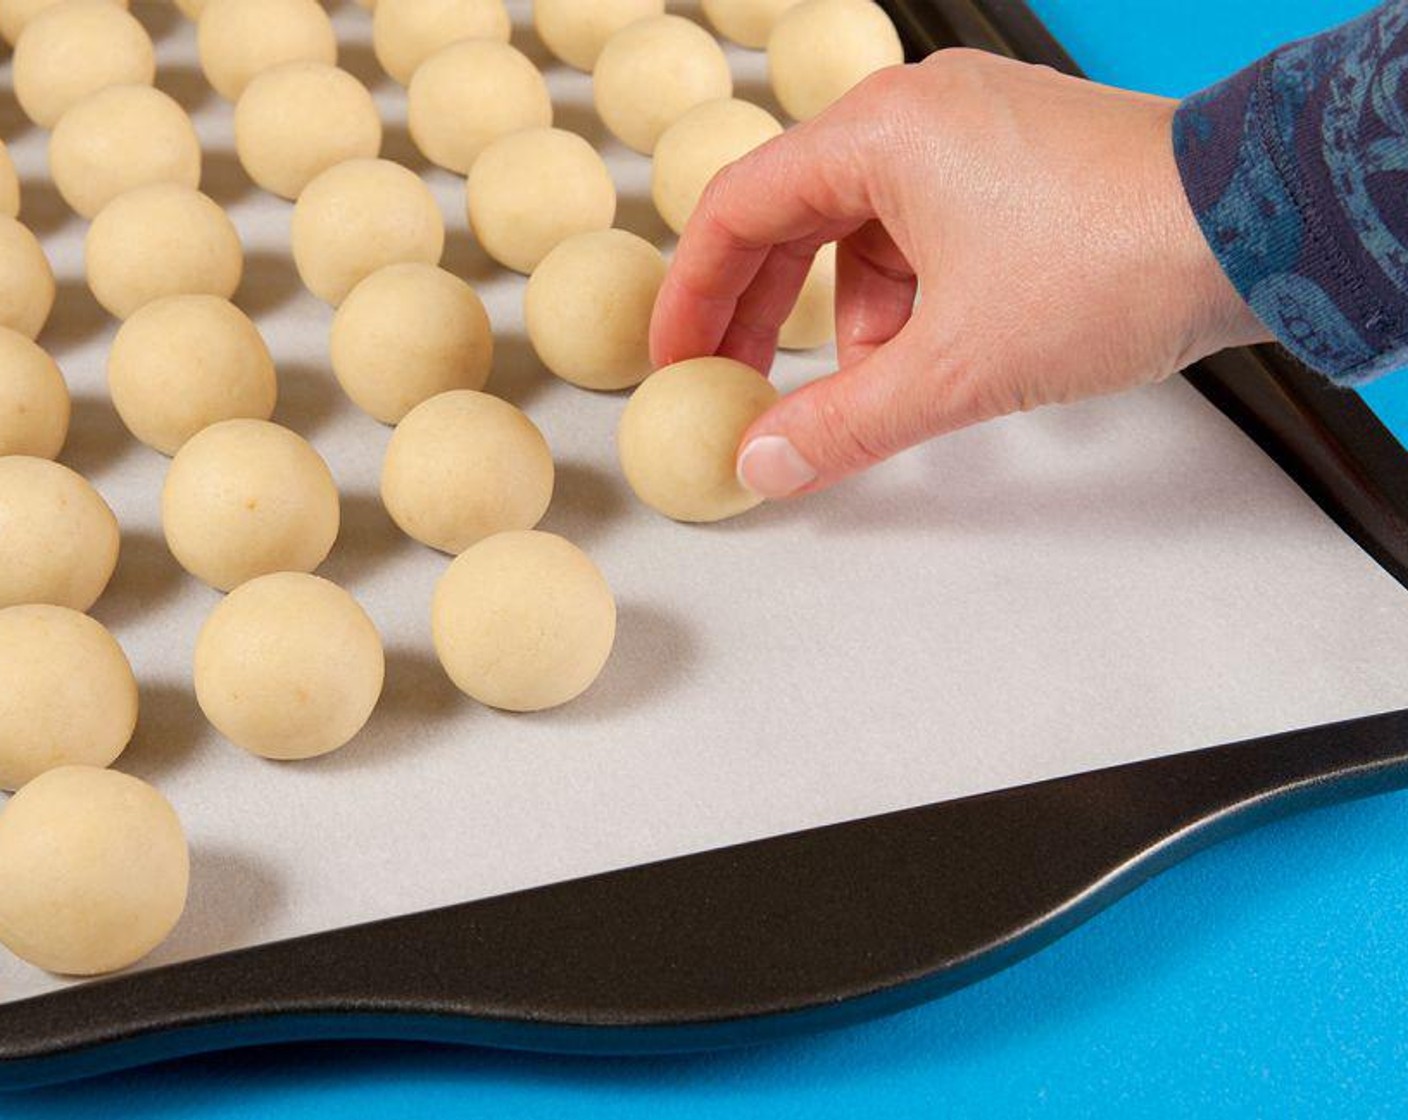 step 6 Place the cake balls in a cookie sheet lined with parchment paper. Cover the balls with a plastic wrap and foil. Put this in the refrigerator for a minimum of four hours.